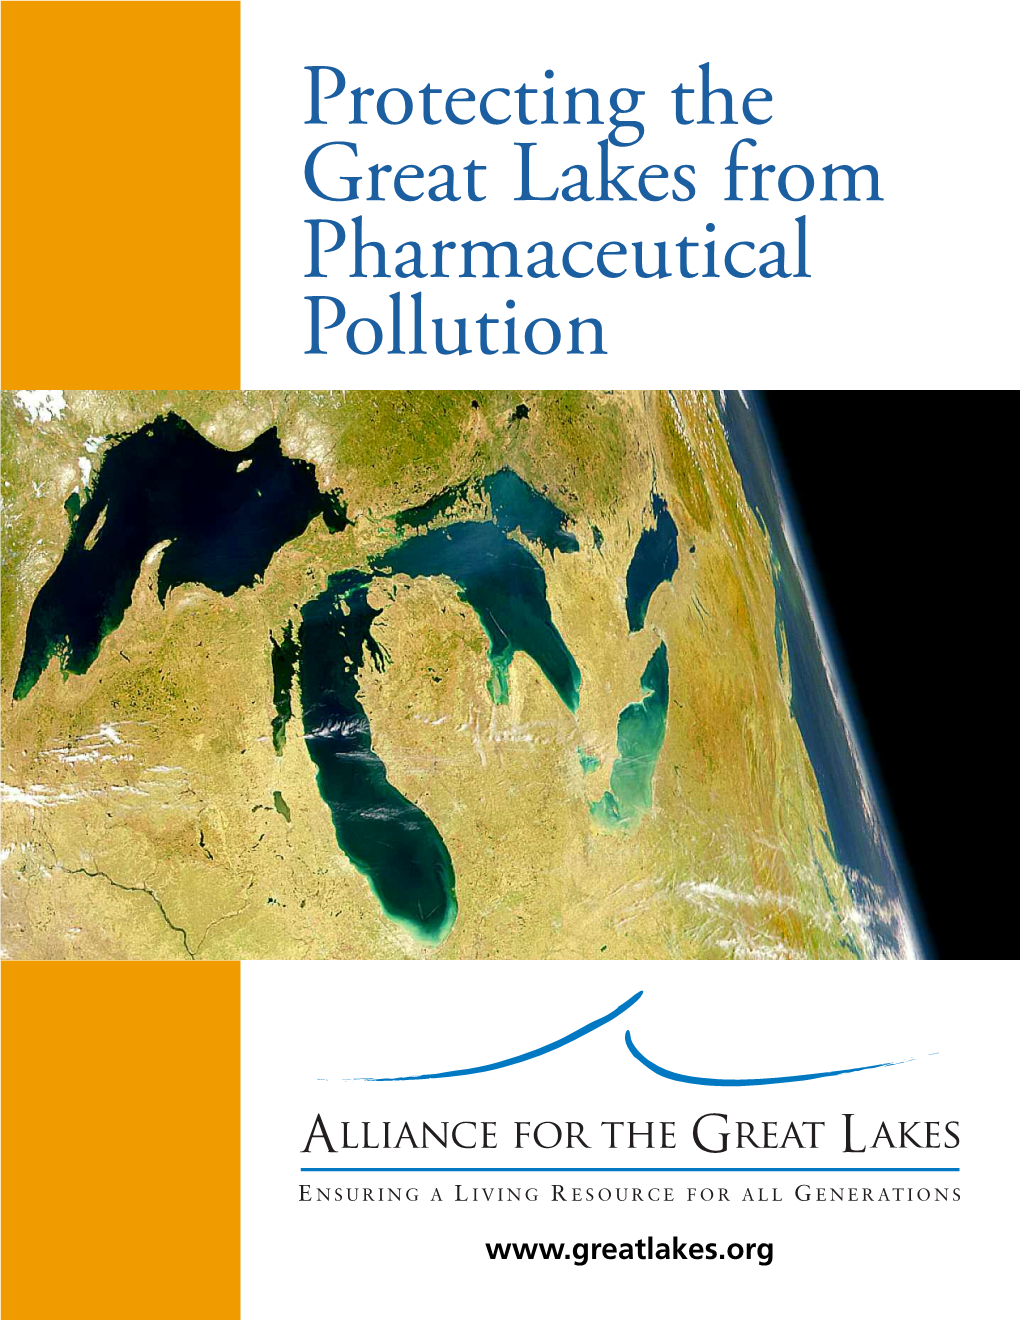 Protecting the Great Lakes from Pharmaceutical Pollution